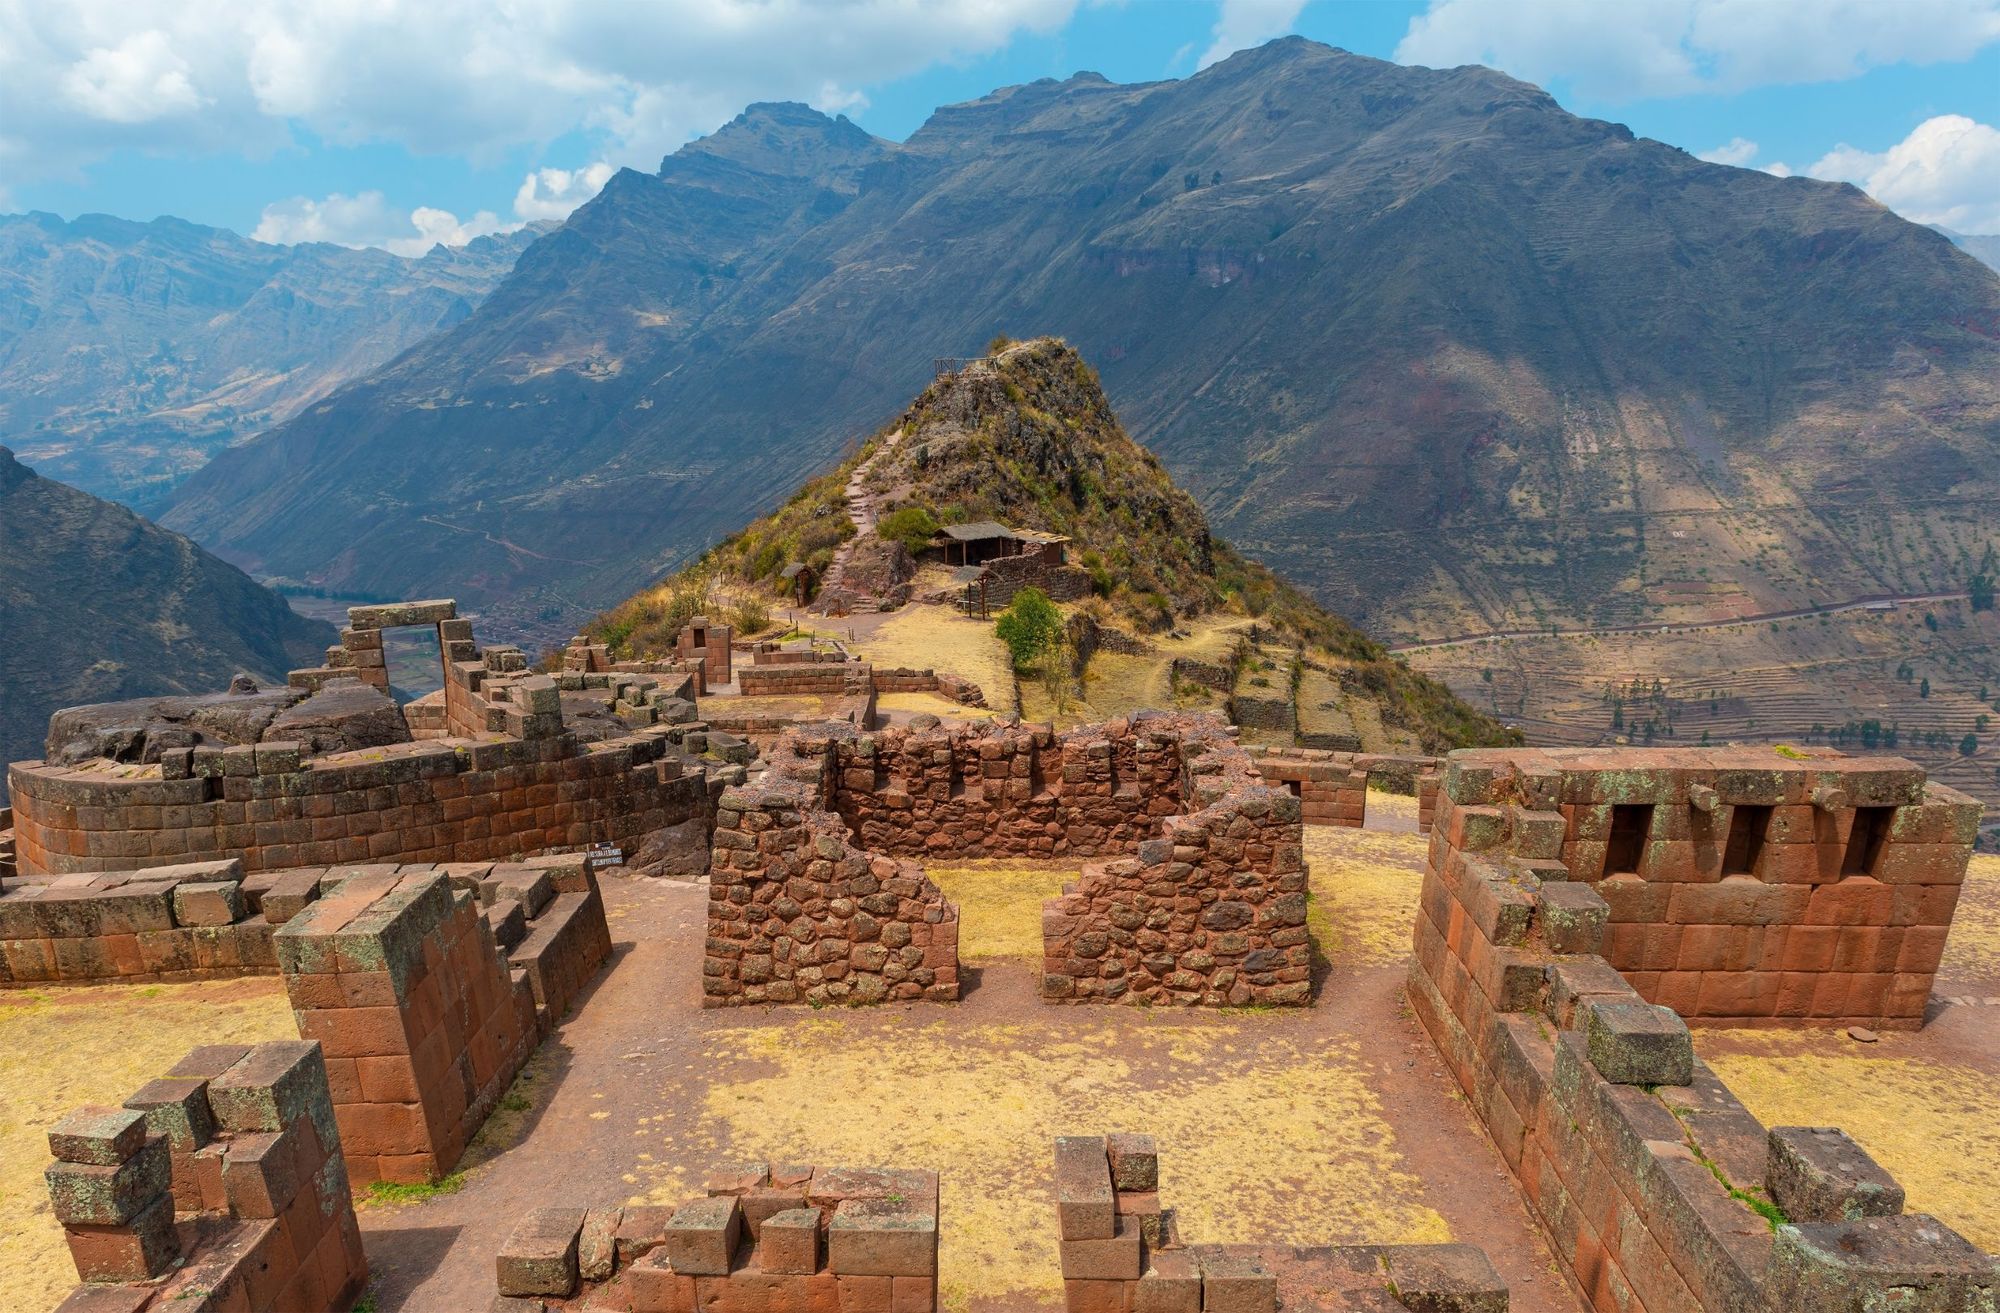 The Inca ruin of Pisac with its Sun Temple in the Andes mountains, Cusco, Peru. Photo: Getty